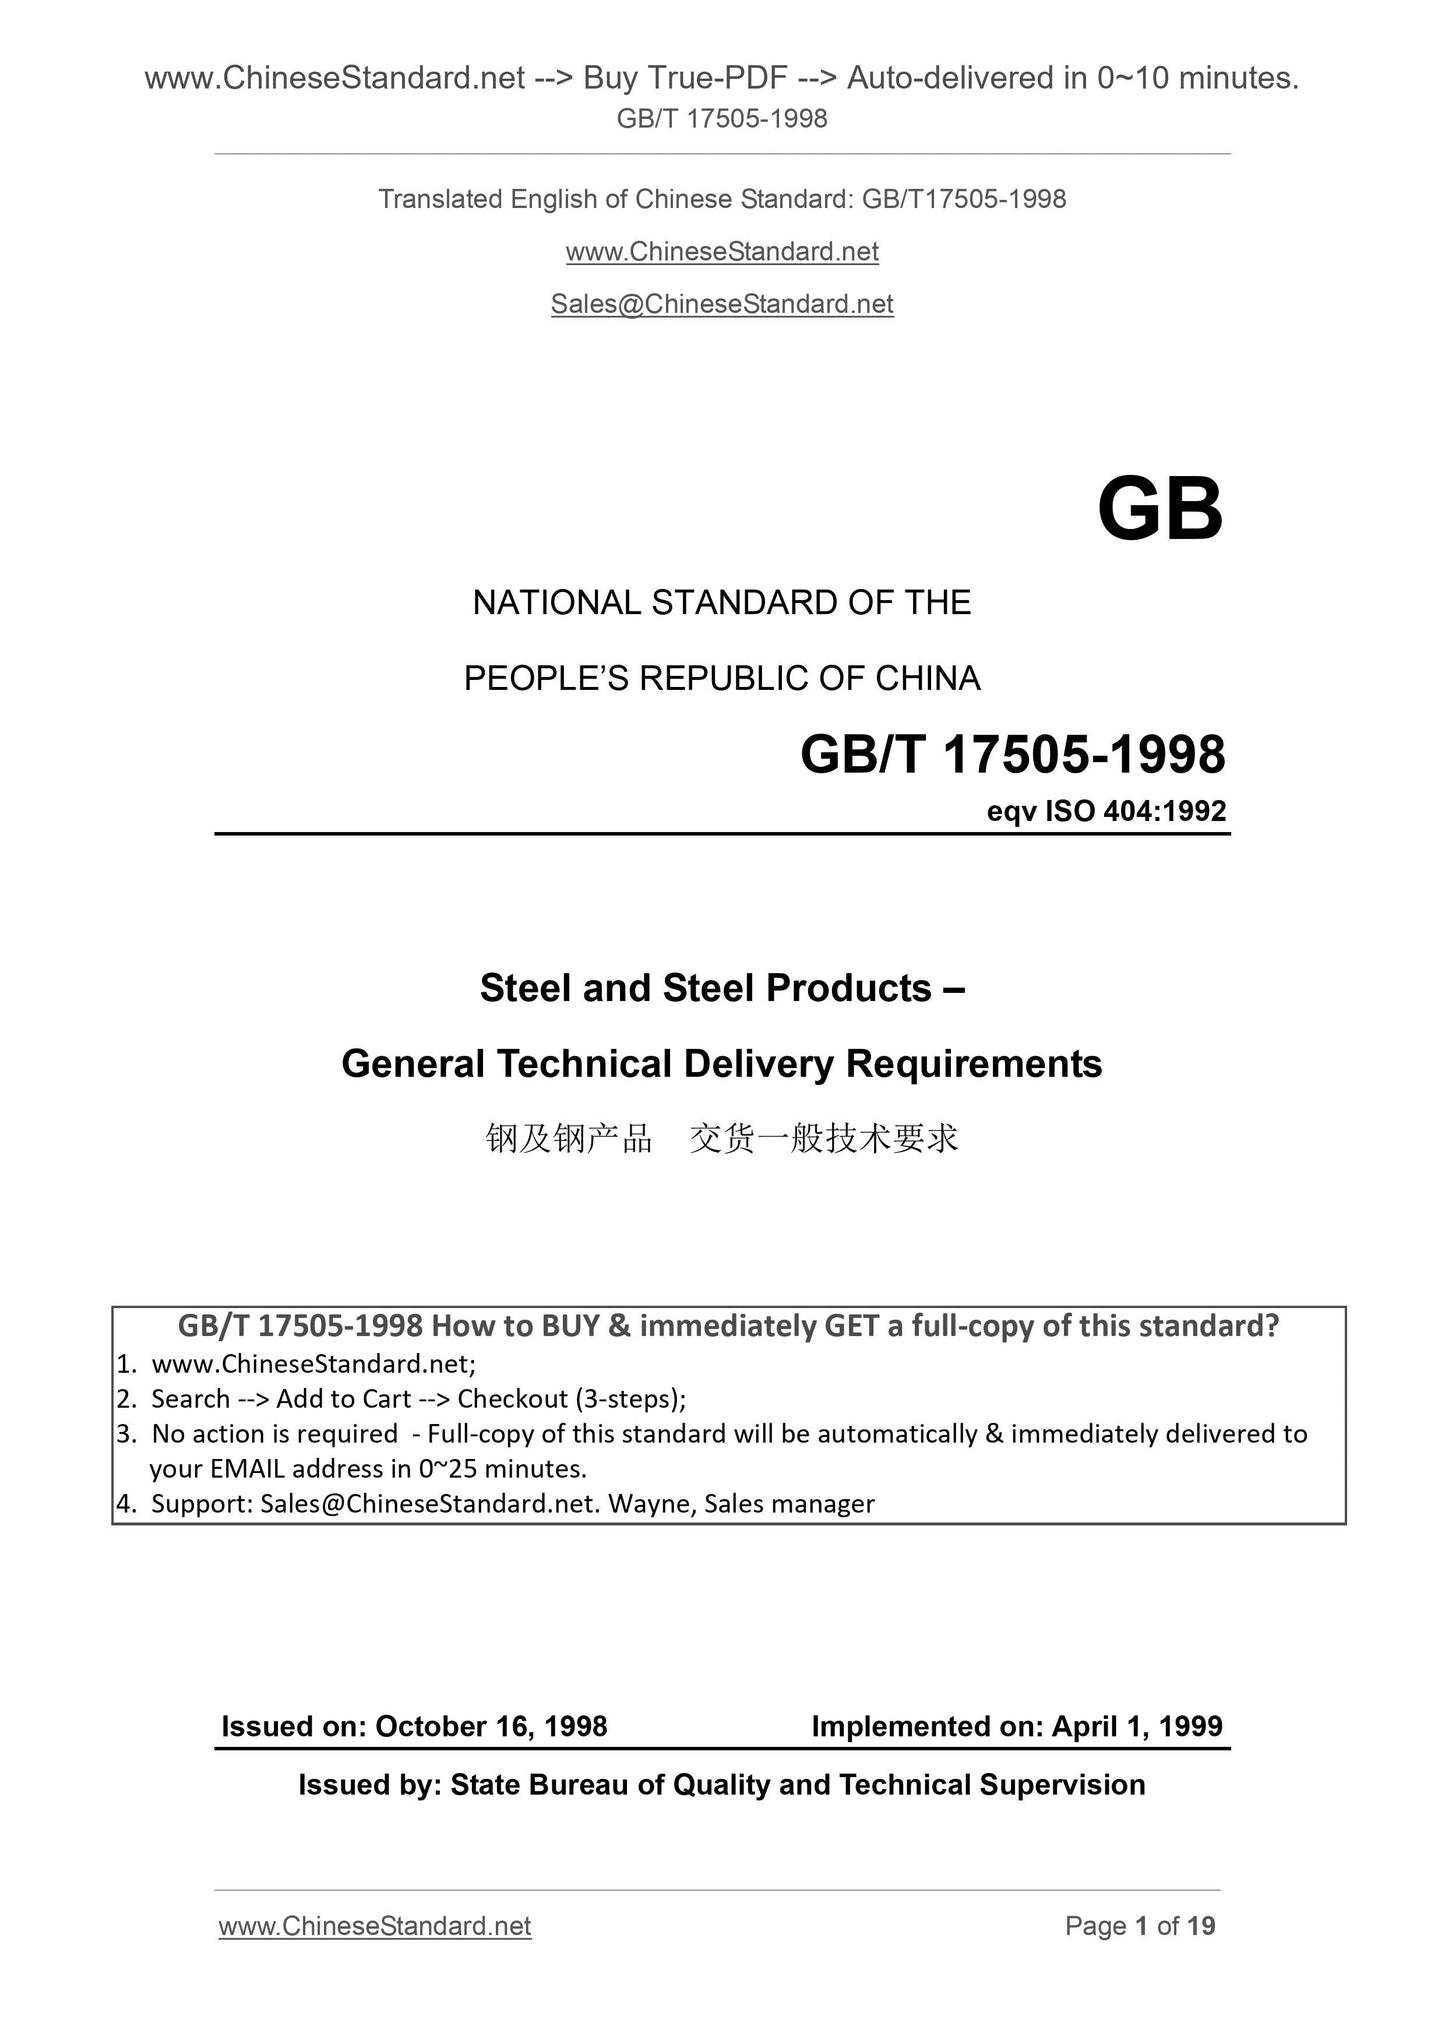 GB/T 17505-1998 Page 1